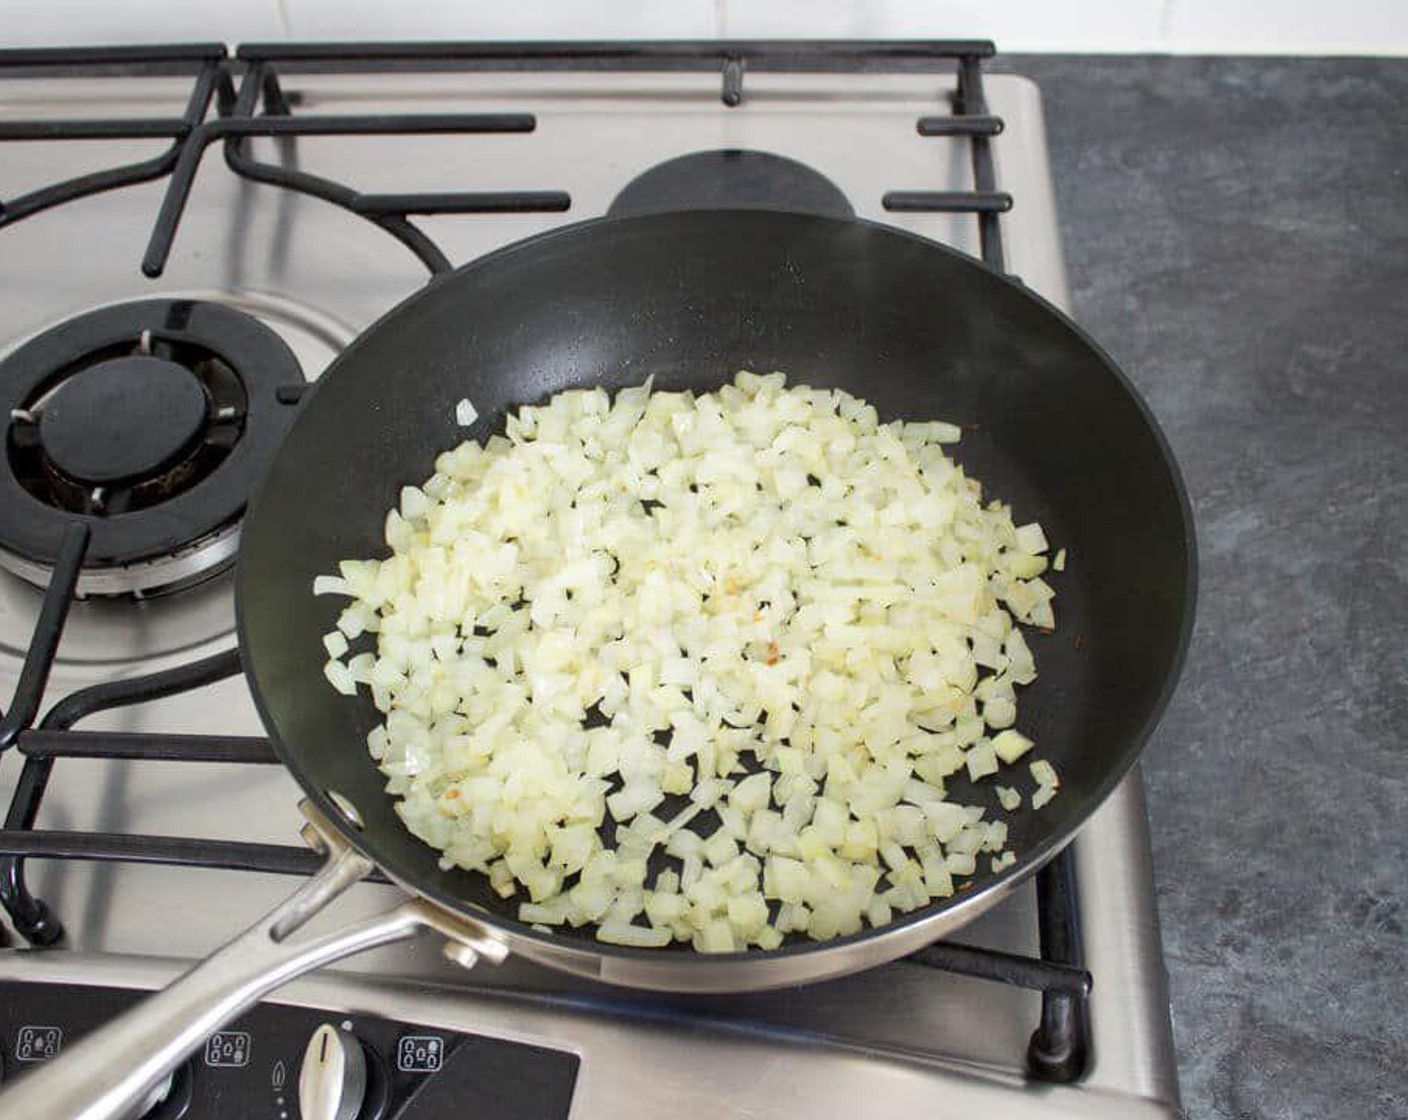 step 2 Heat a large non-stick saucepan over a medium heat. When the pan is hot, add the Rice Bran Oil (2 Tbsp) followed by the diced onion. Fry, stirring often, for about 5 minutes until onion just starts to turn golden.